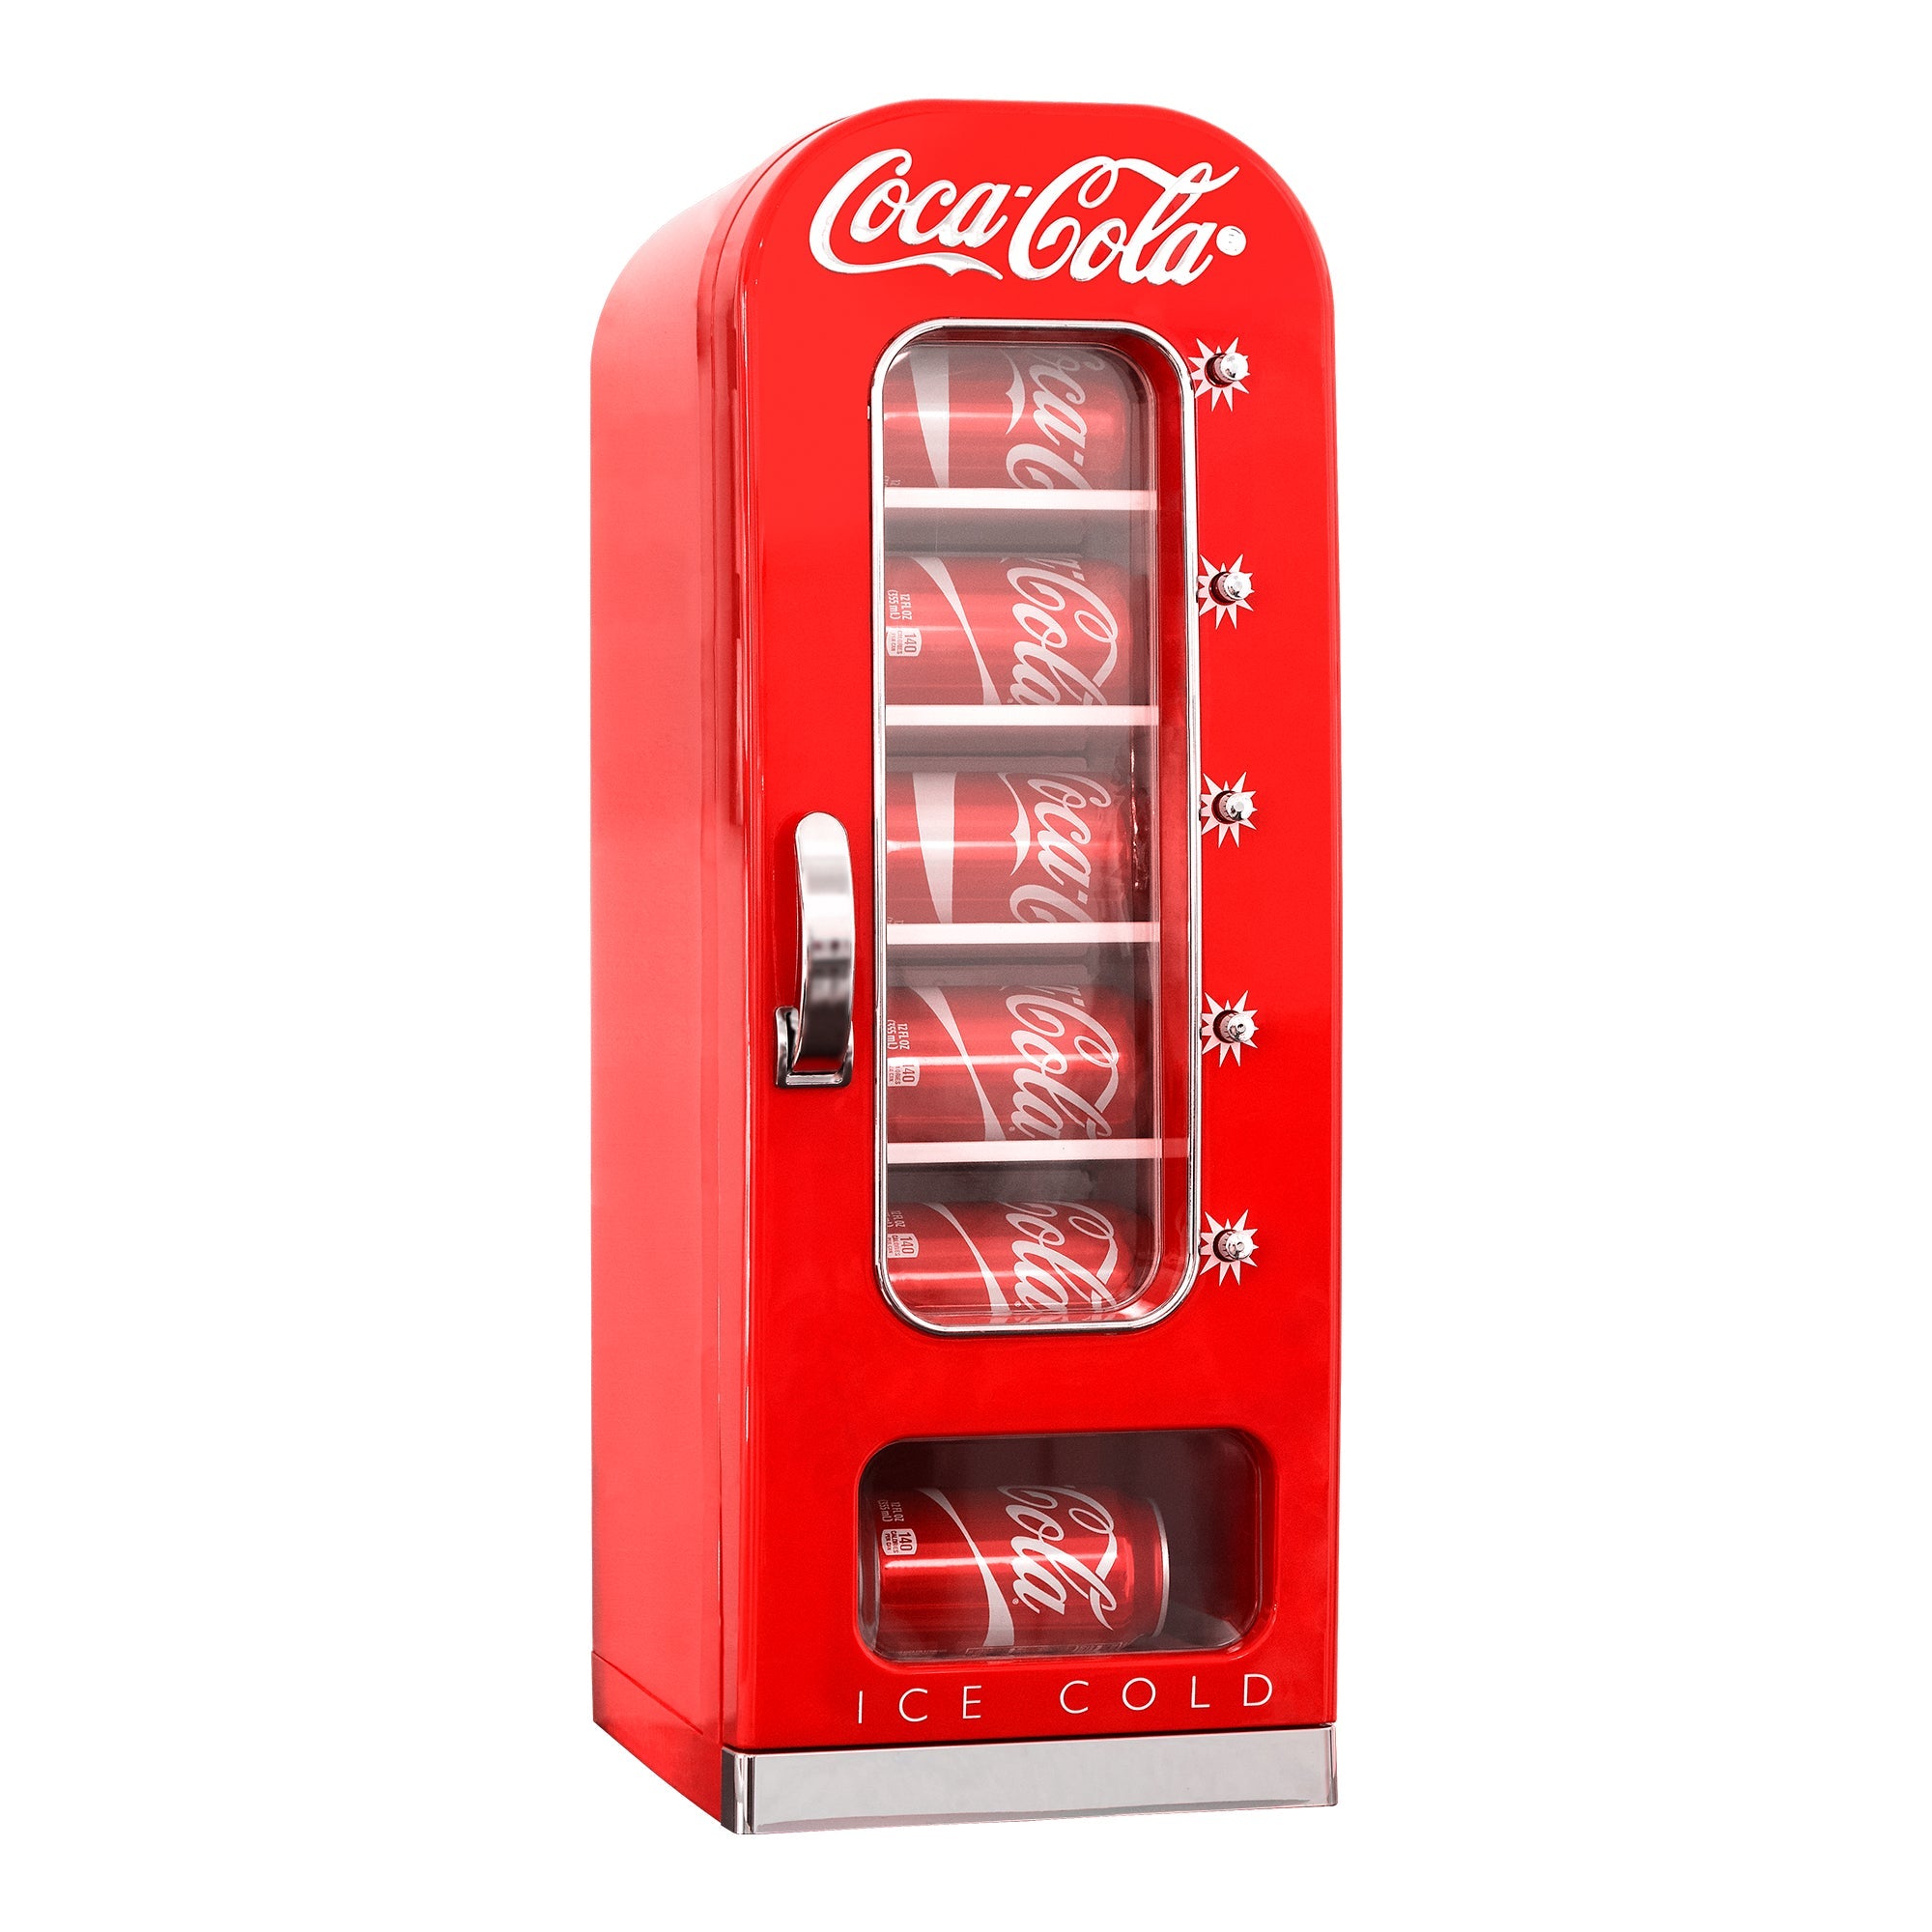 Product shot of Coca-Cola 10 can vending mini fridge filled with cans of Coke on a white background